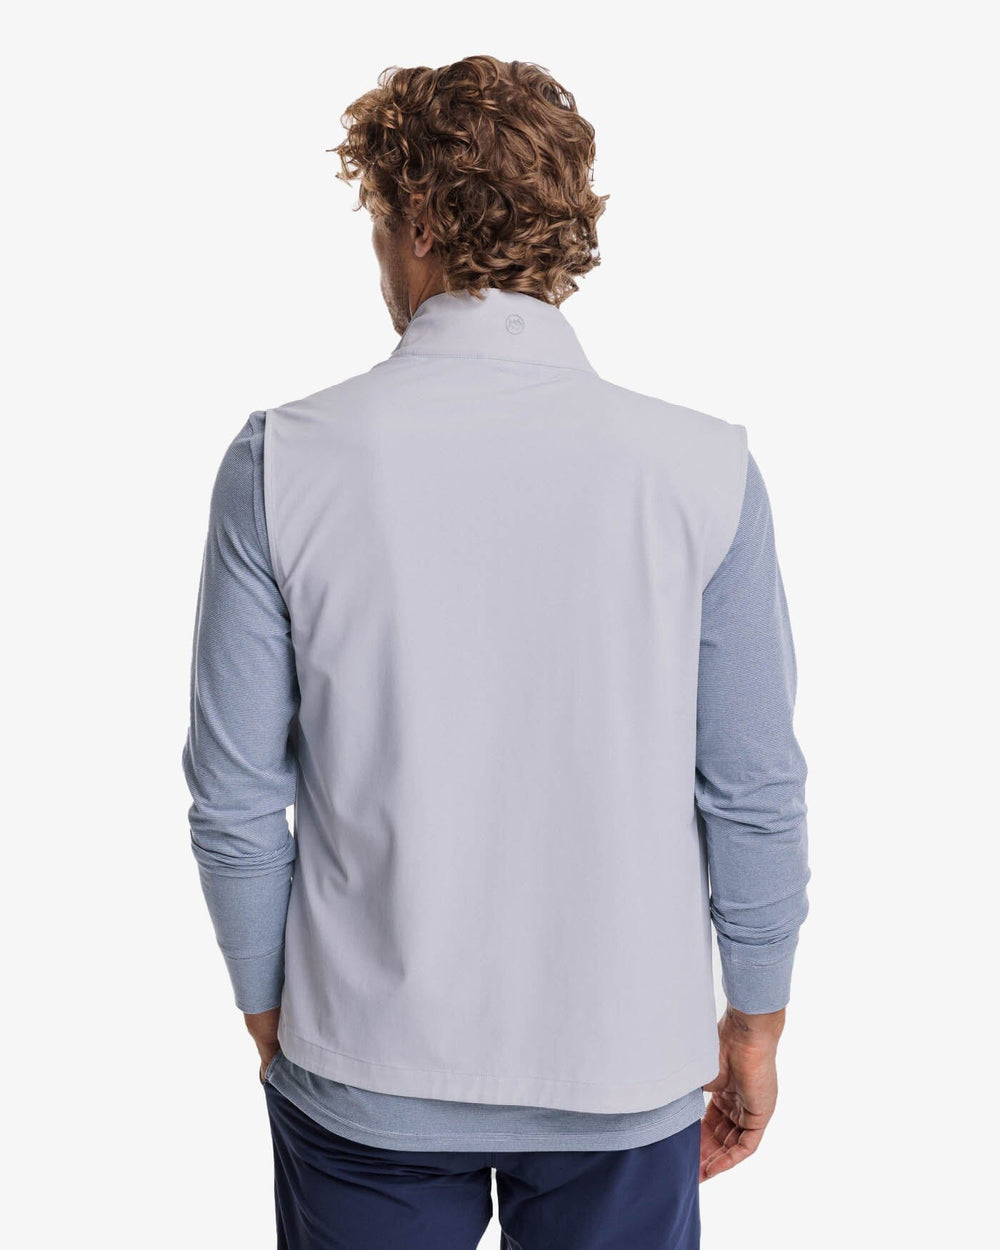 The back view of the Southern Tide Bowline Performance Vest by Southern Tide - Platinum Grey